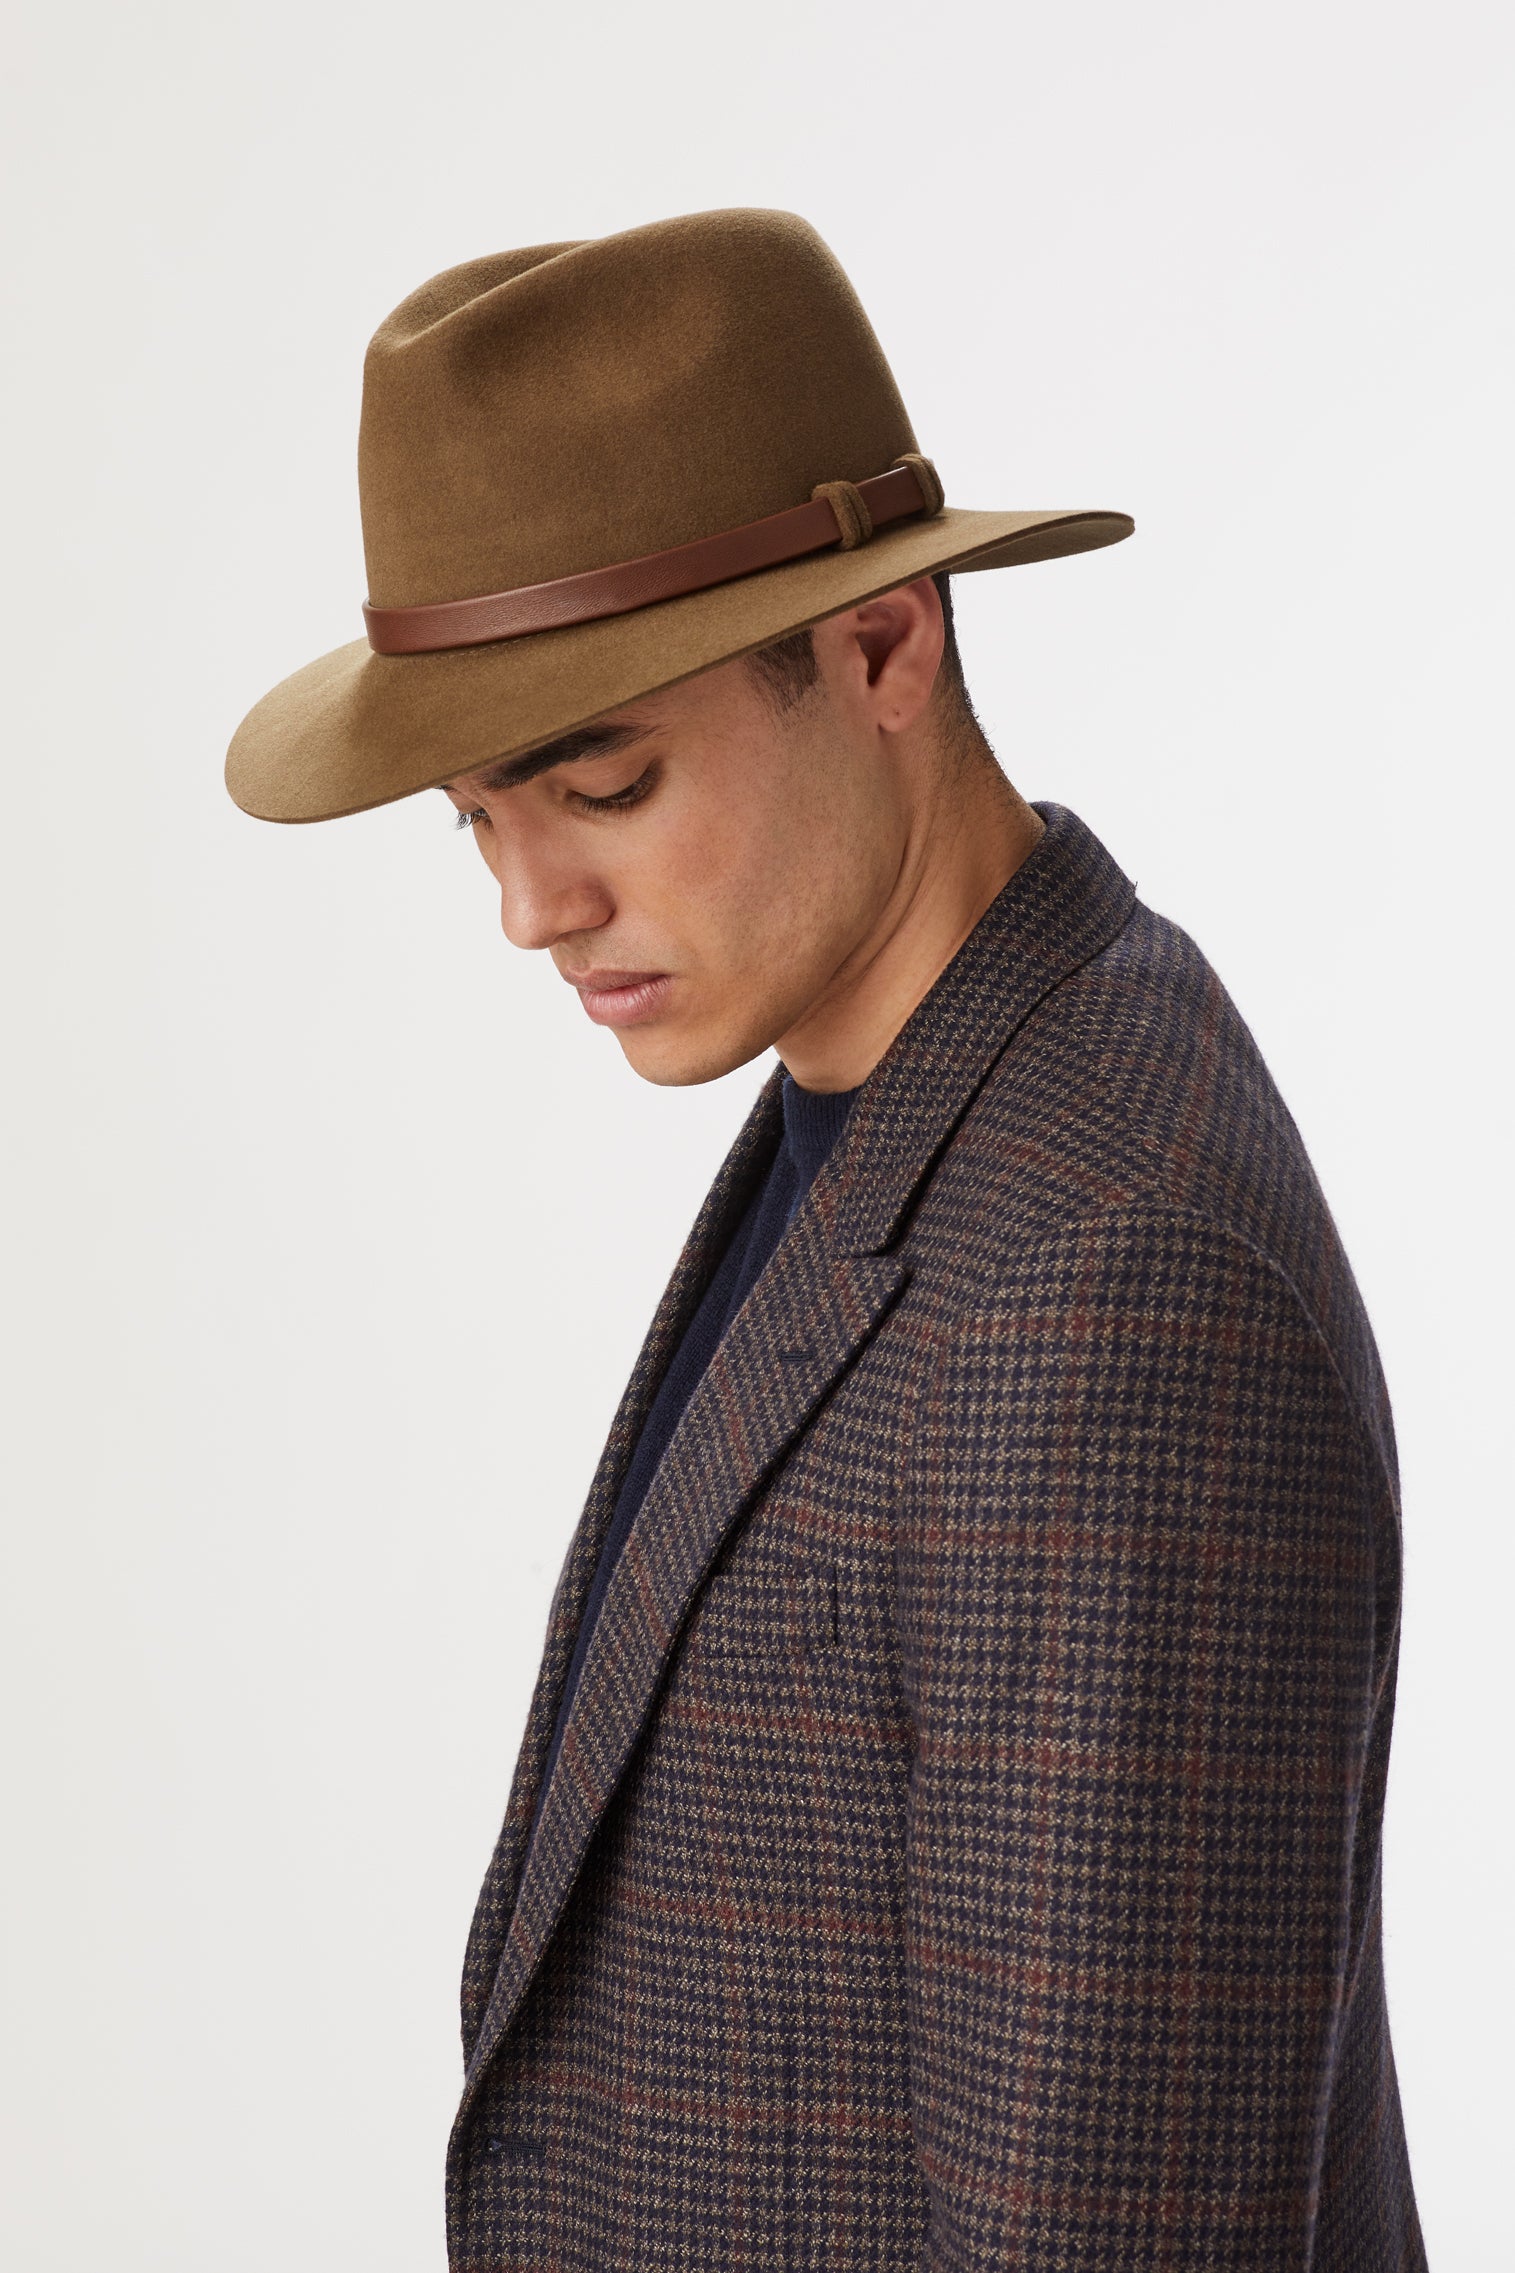 Chepstow Trilby - Cheltenham Collection - Lock & Co. Hatters London UK